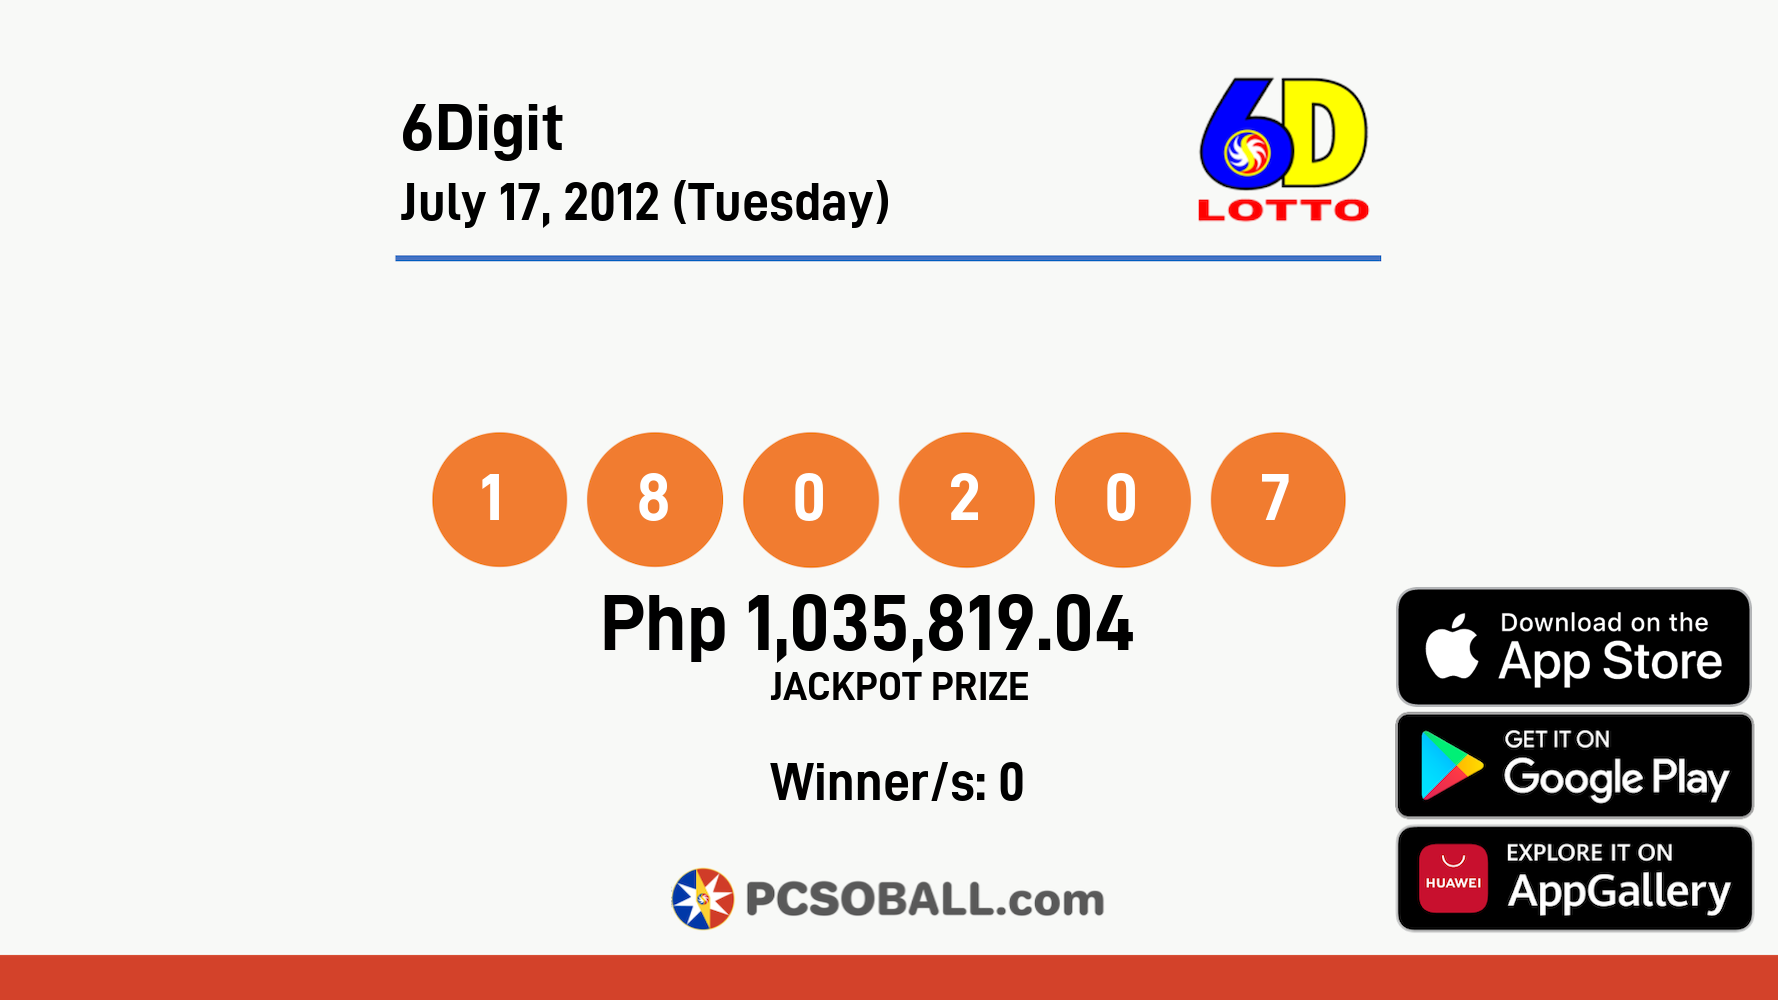 6Digit July 17, 2012 (Tuesday) Result